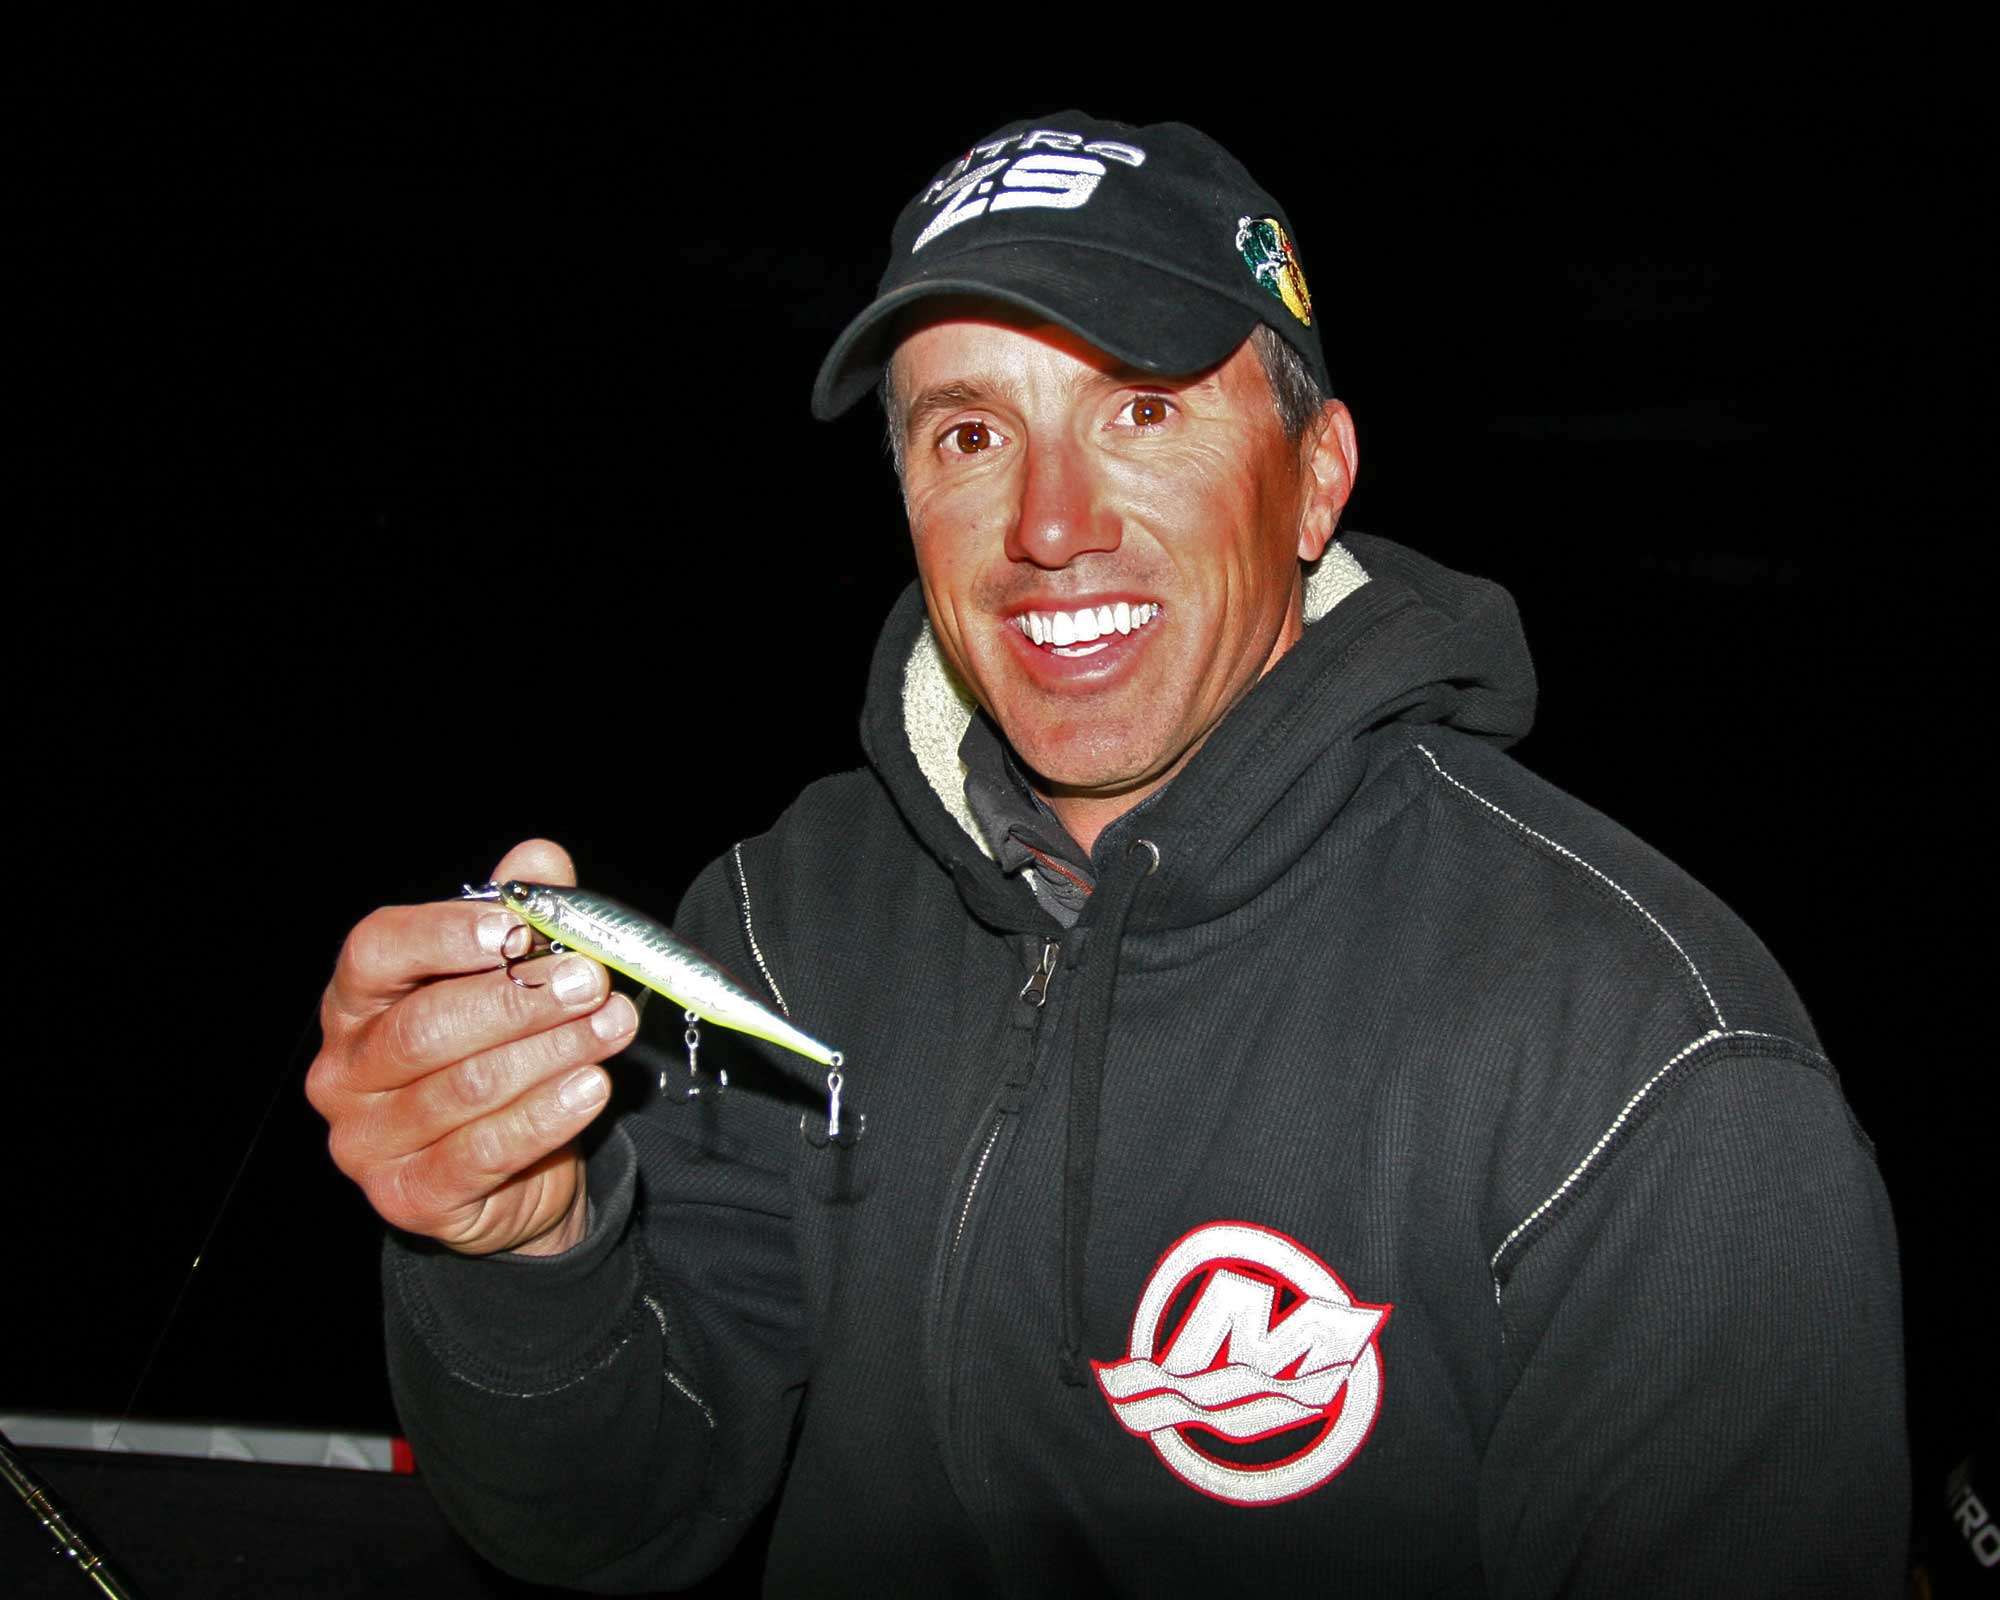 Edwin Evers successfully used his Megabass Vision 110 jerkbait to finish 6th place in the event.